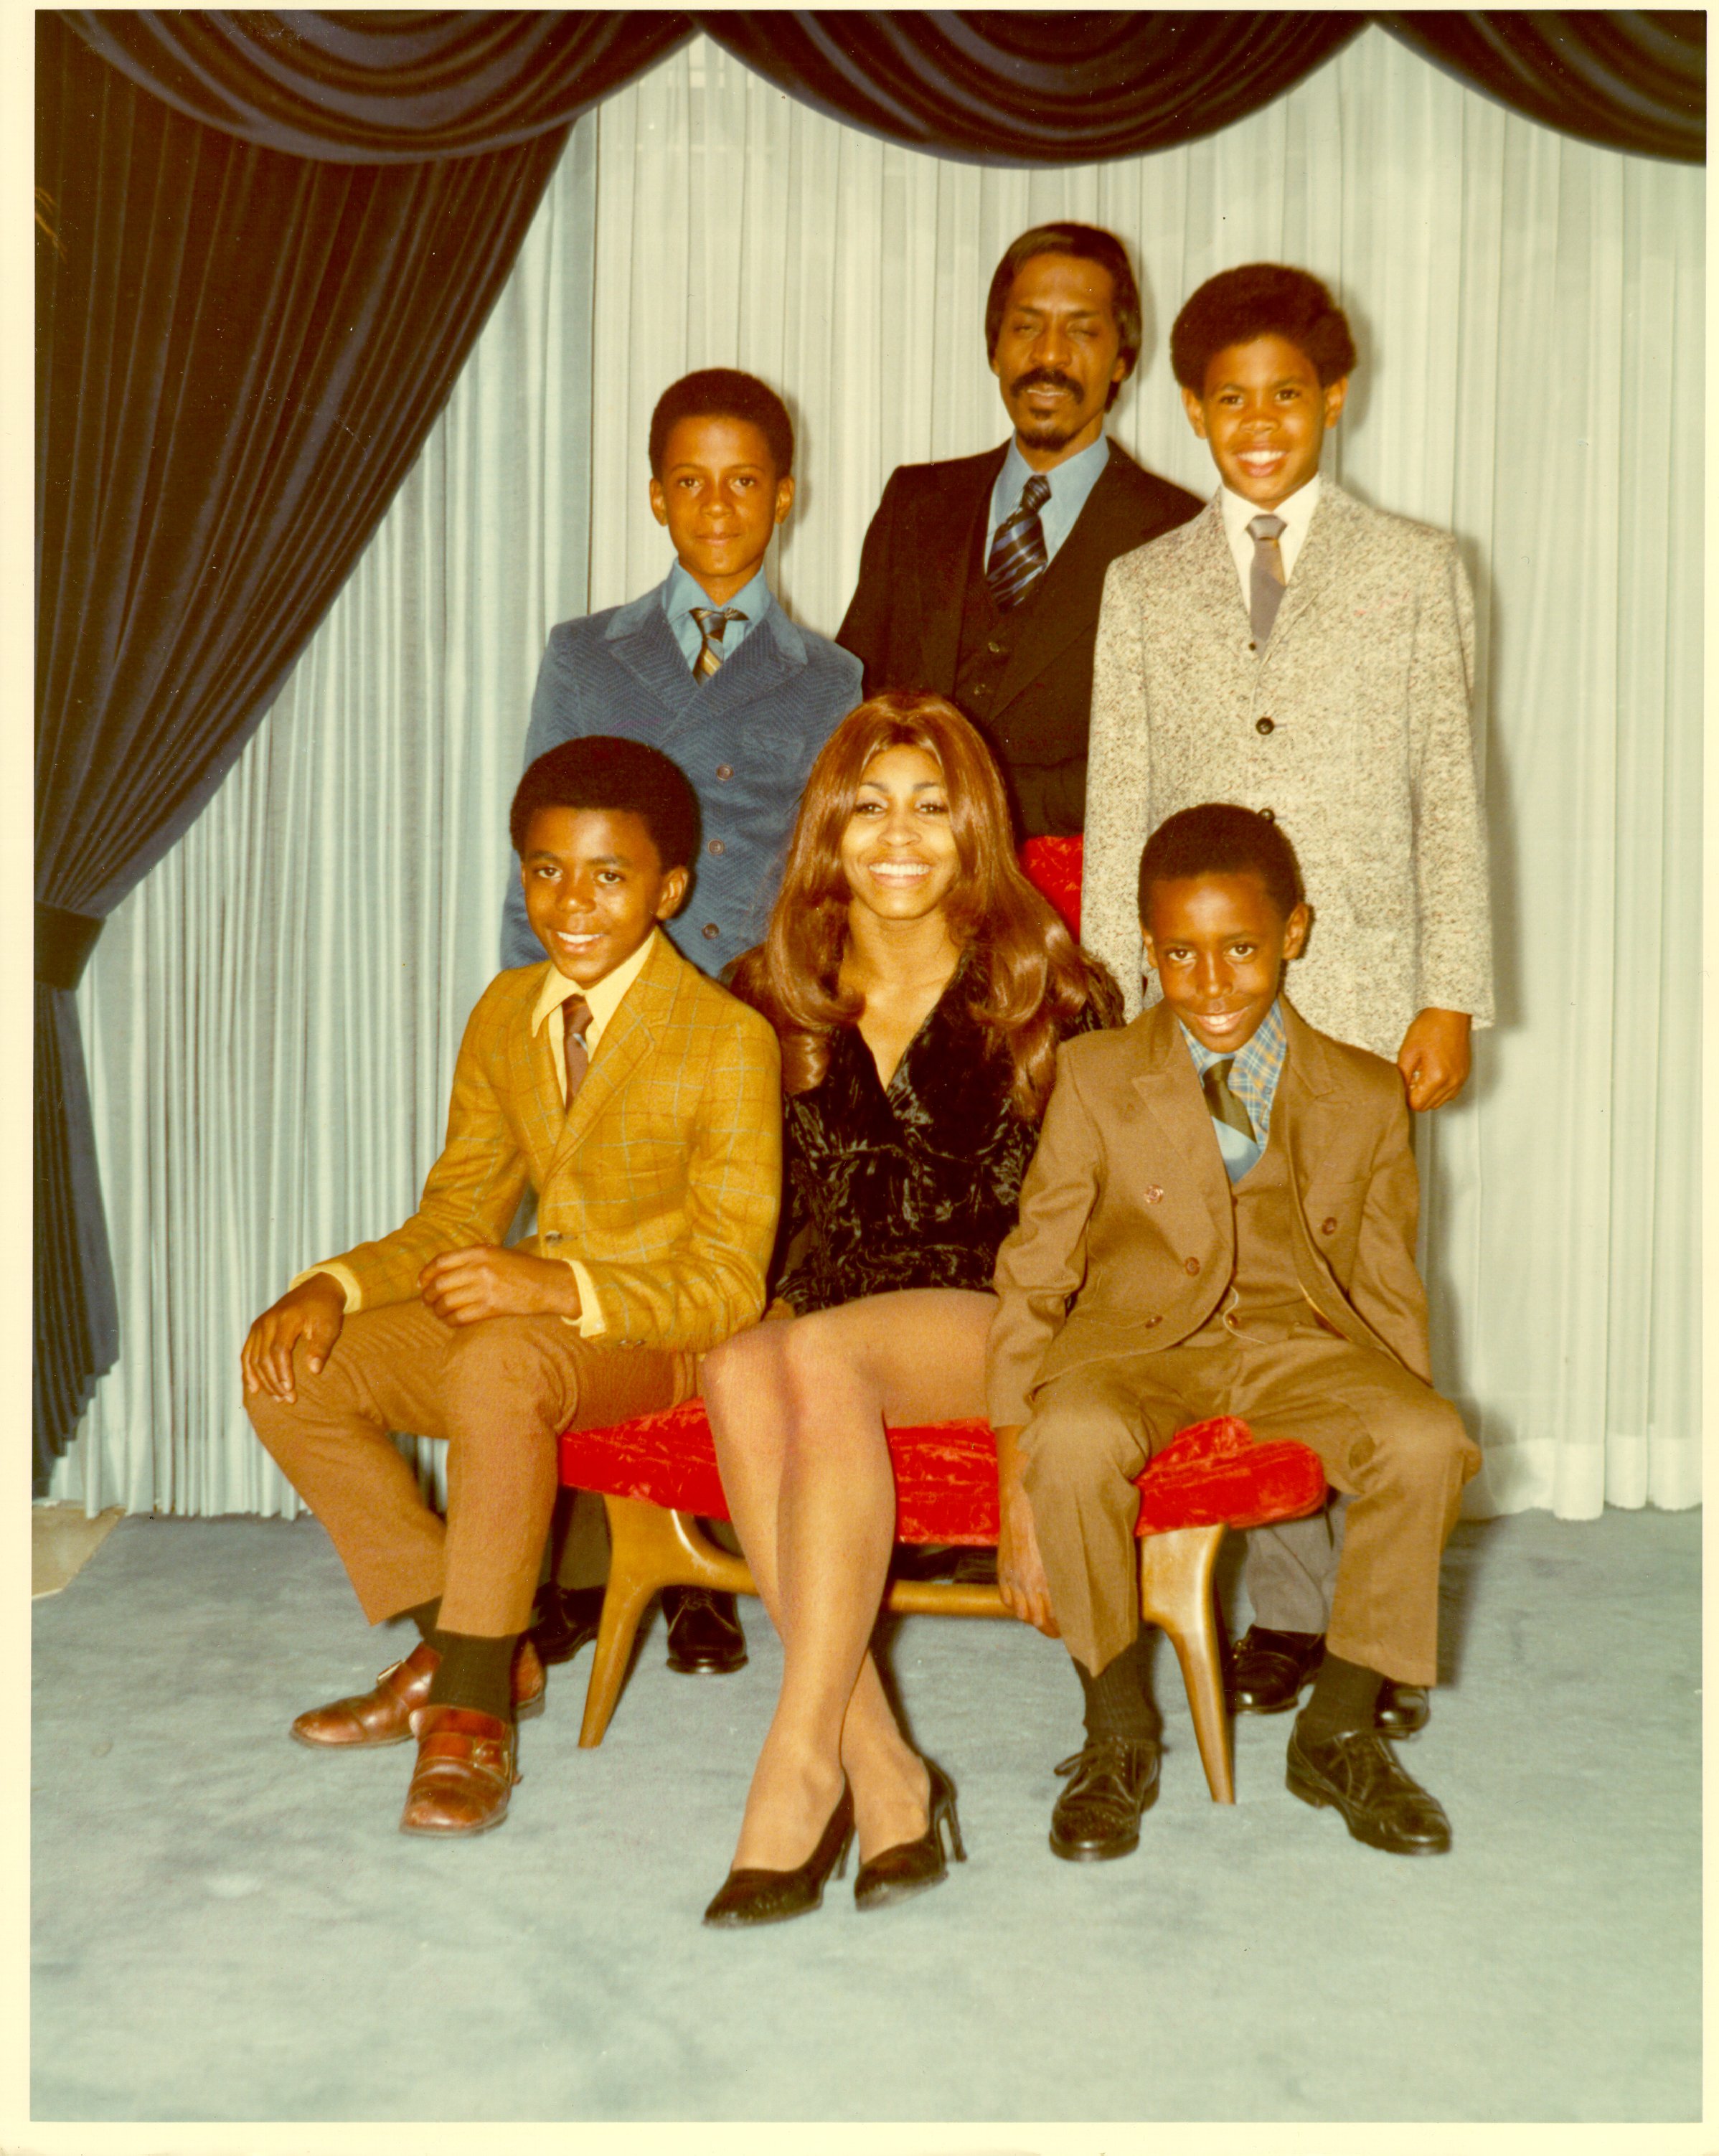 Ike & Tina Turner with their children: Michael Turner, Ike Turner, Jr., Craig Hill, and Ronnie Turner, circa 1972, on January 01, 1972. | Source: Getty Images